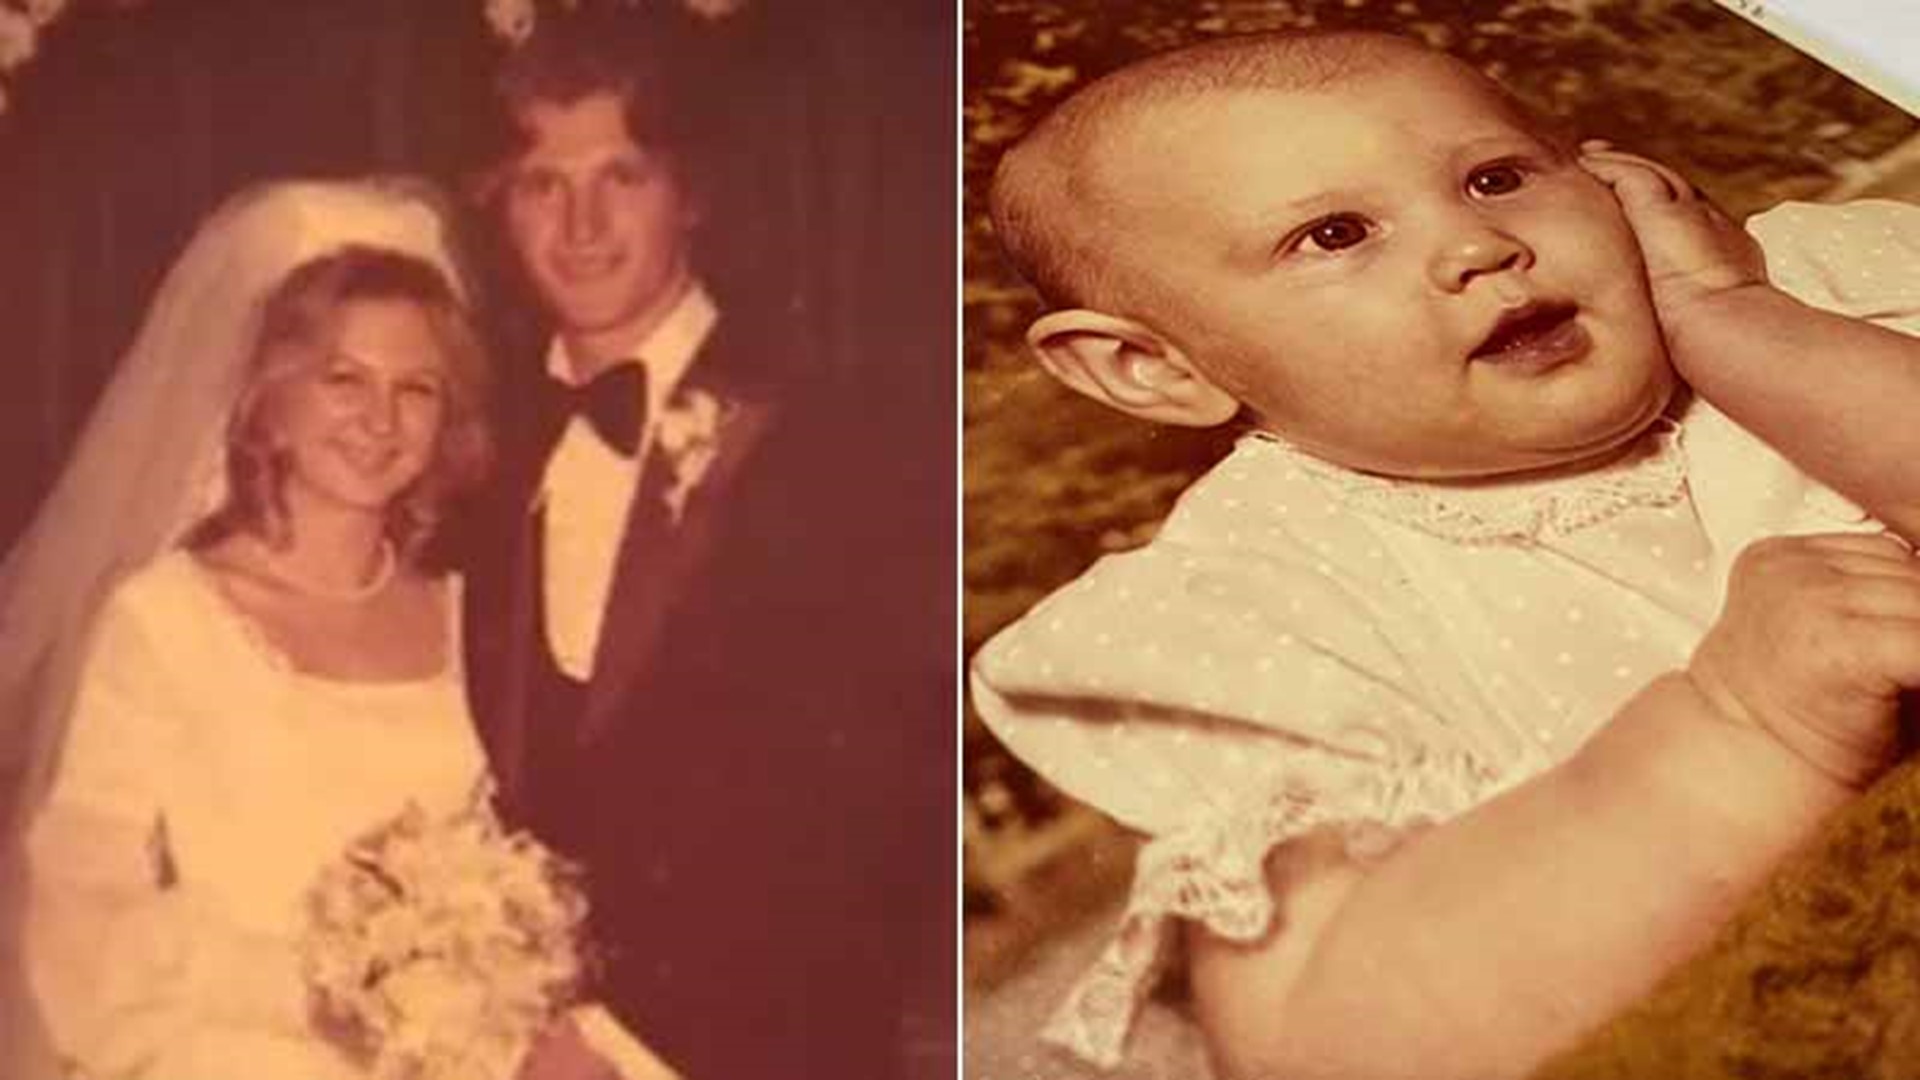 We talk with Karen's widower and the daughter who was only 3 months old when her mom was brutally murdered in their Houston home.